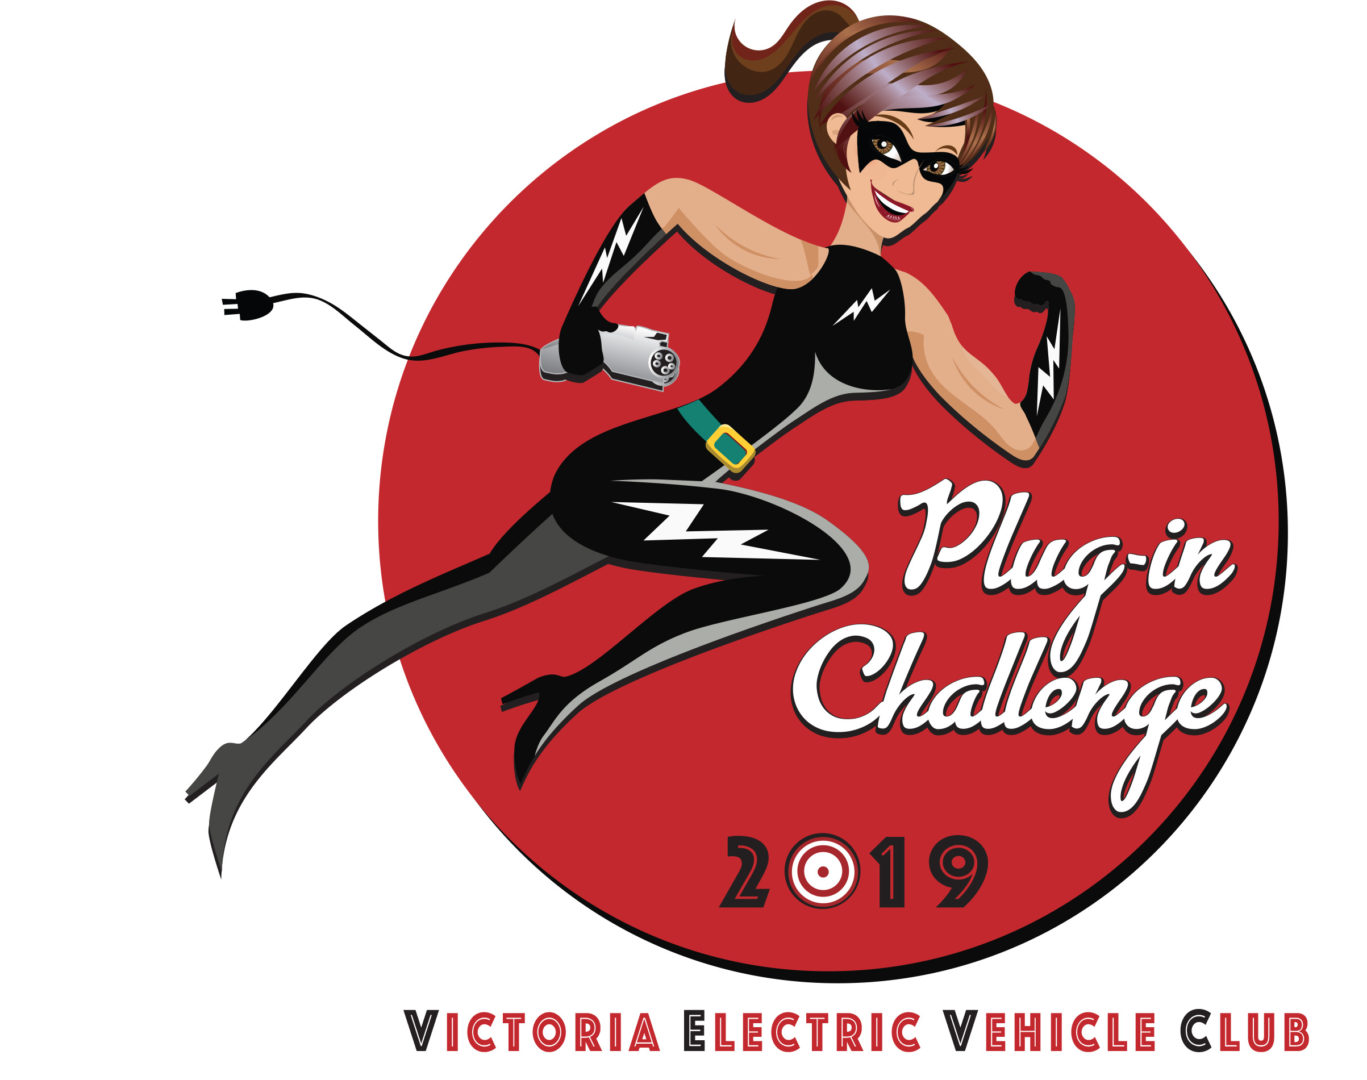 Take “The Plug-In Challenge”